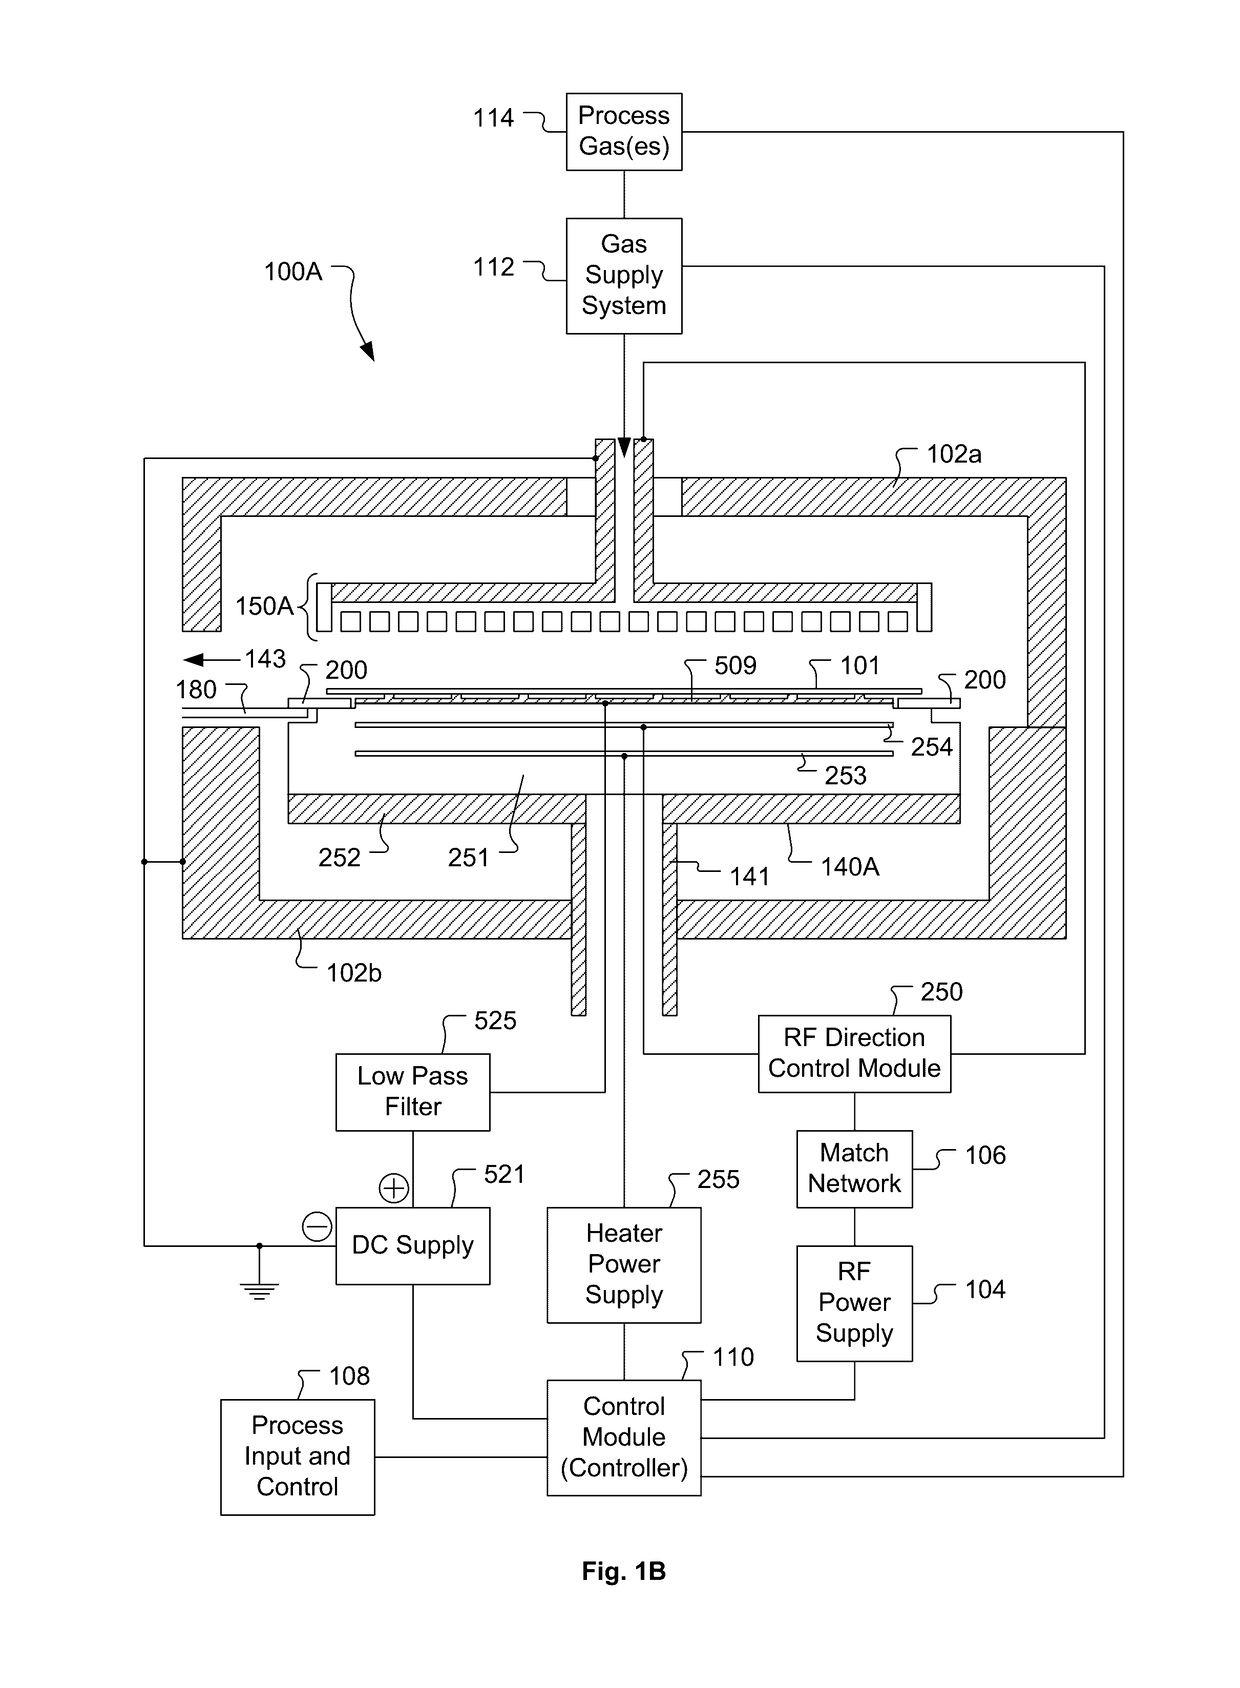 Systems and Methods for Detection of Plasma Instability by Optical Diagnosis